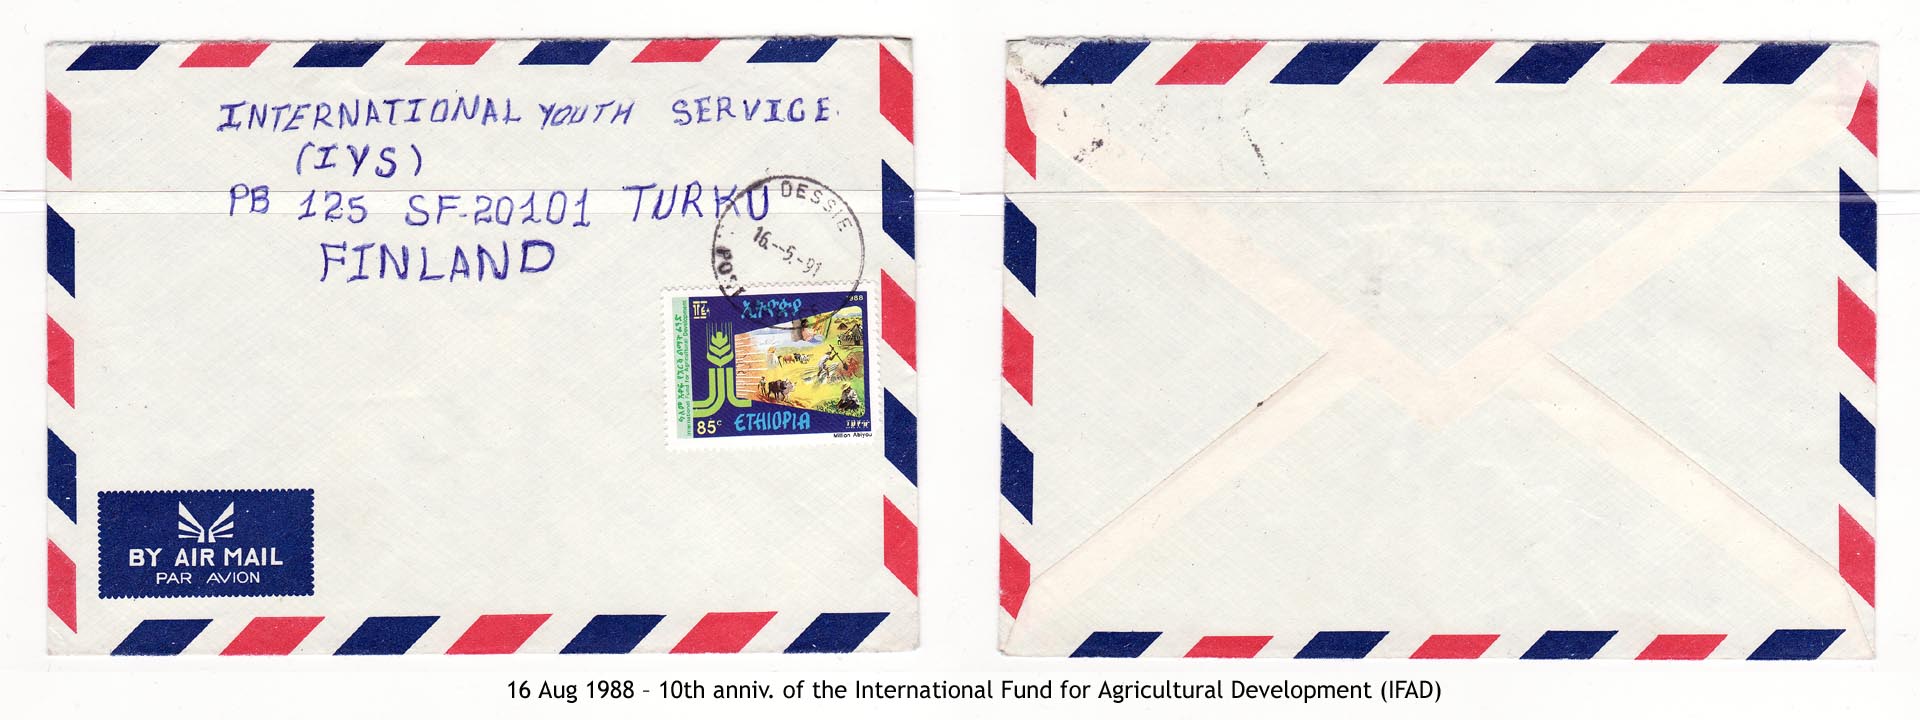 19880816 – 10th anniv. of the International Fund for Agricultural Development (IFAD)